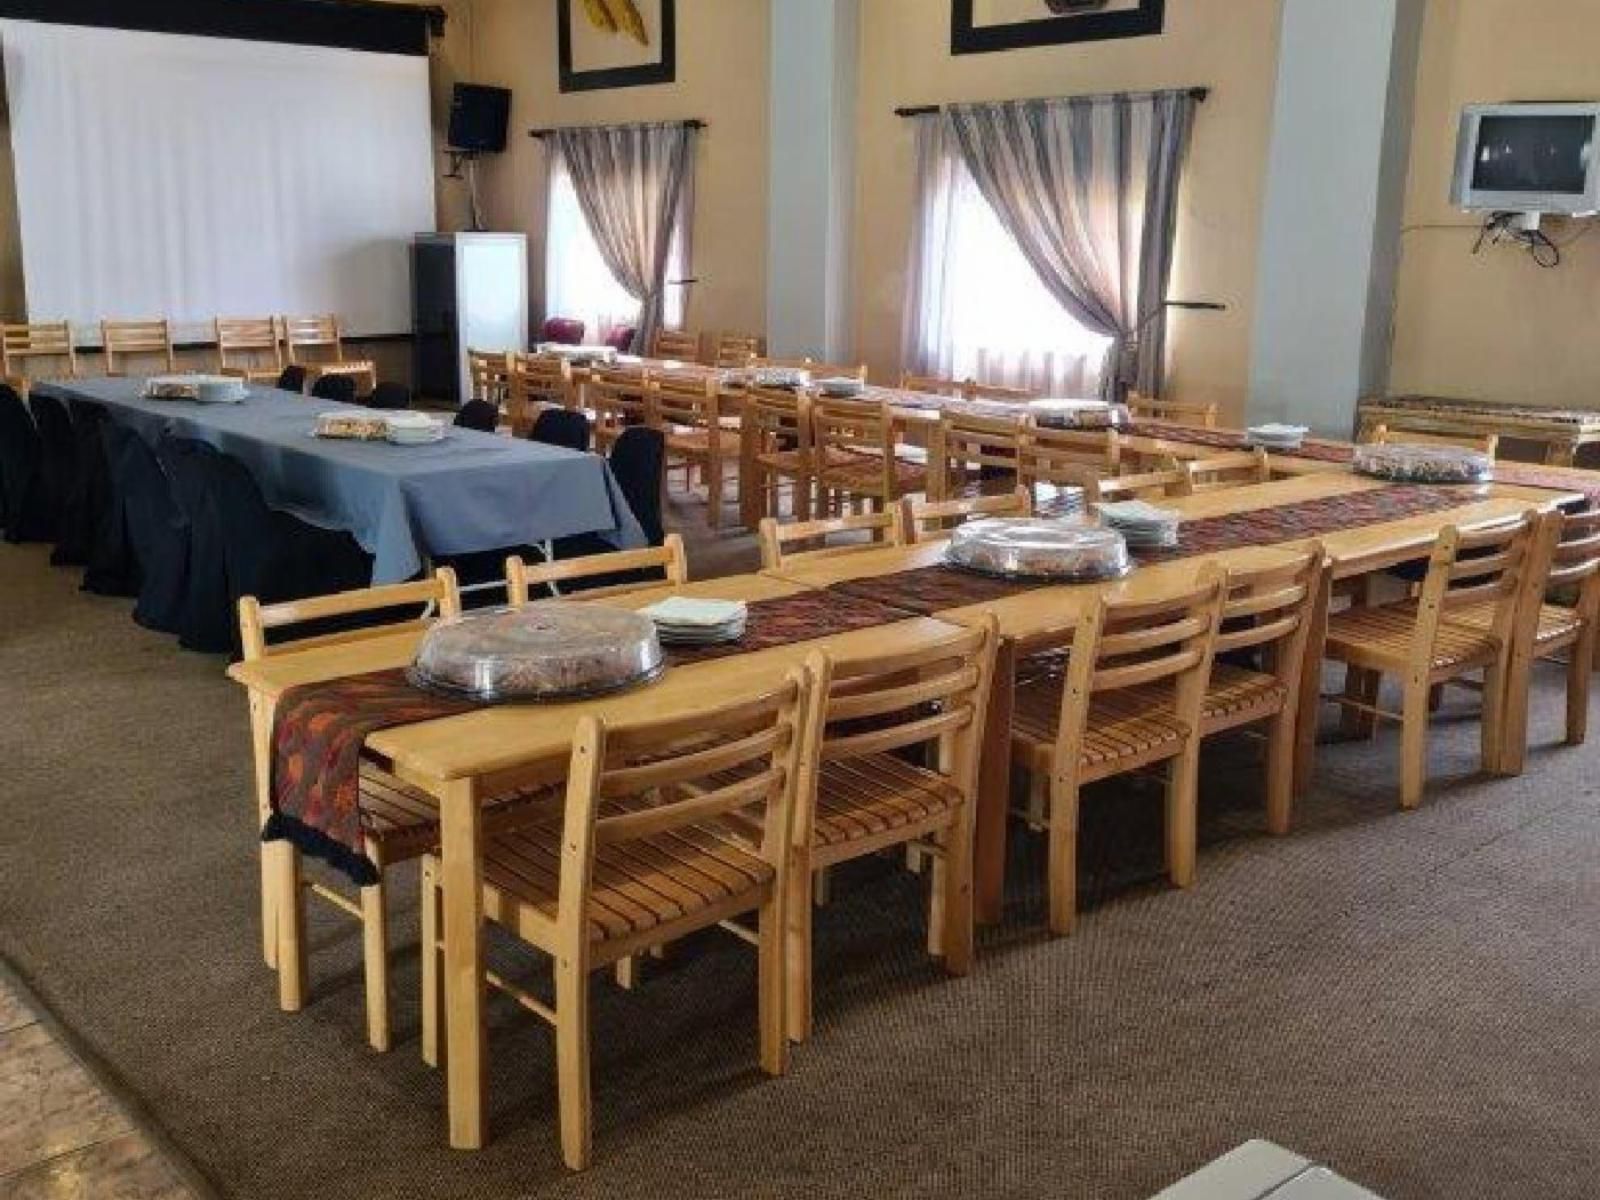 The Venue And Guest Rooms On Site Potchefstroom North West Province South Africa Place Cover, Food, Seminar Room